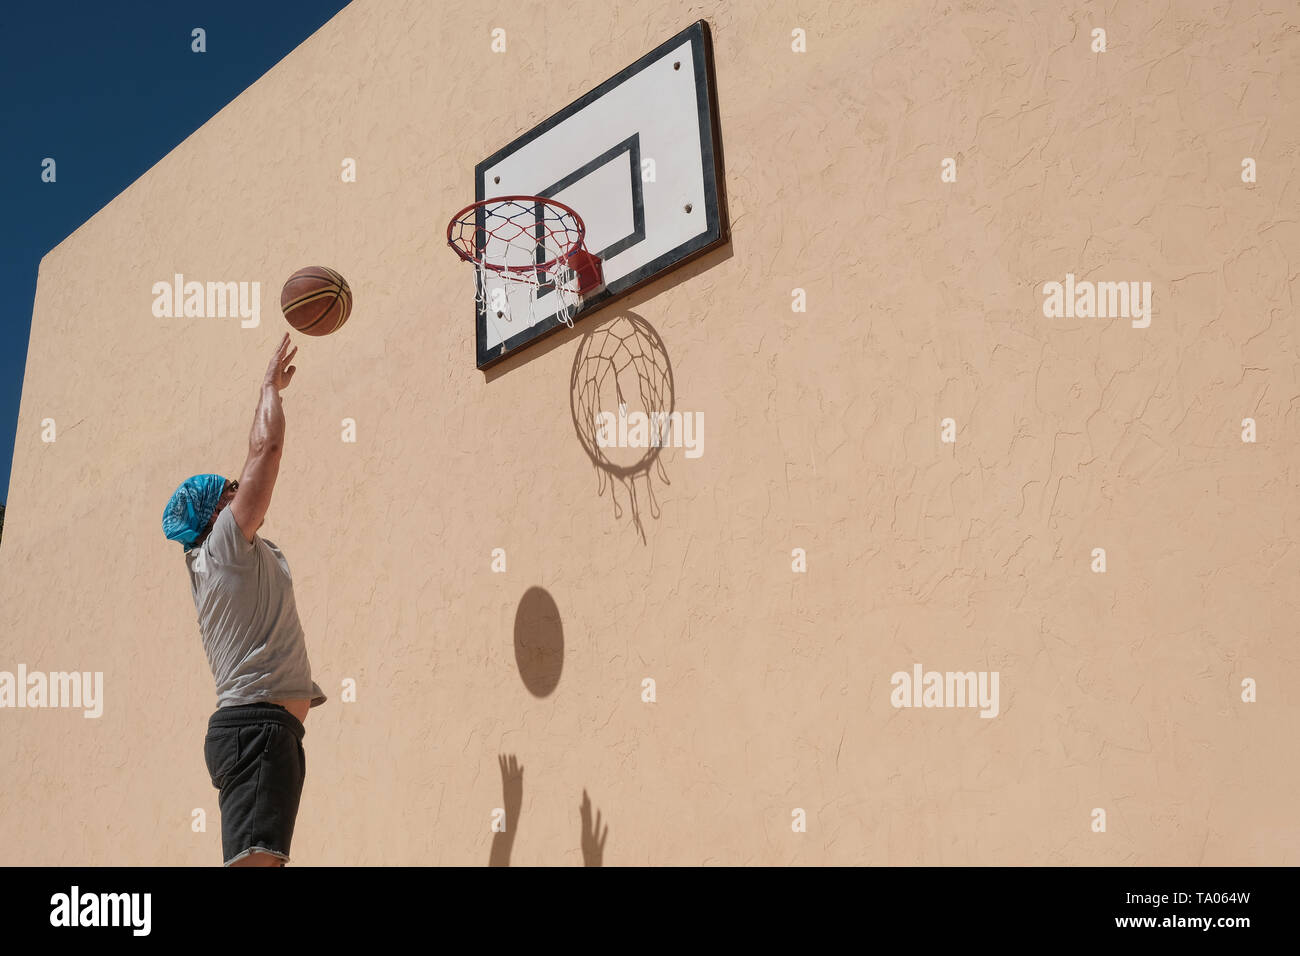 one man playing basketball. The ball and the net create shadows on the yellow wall. Stock Photo